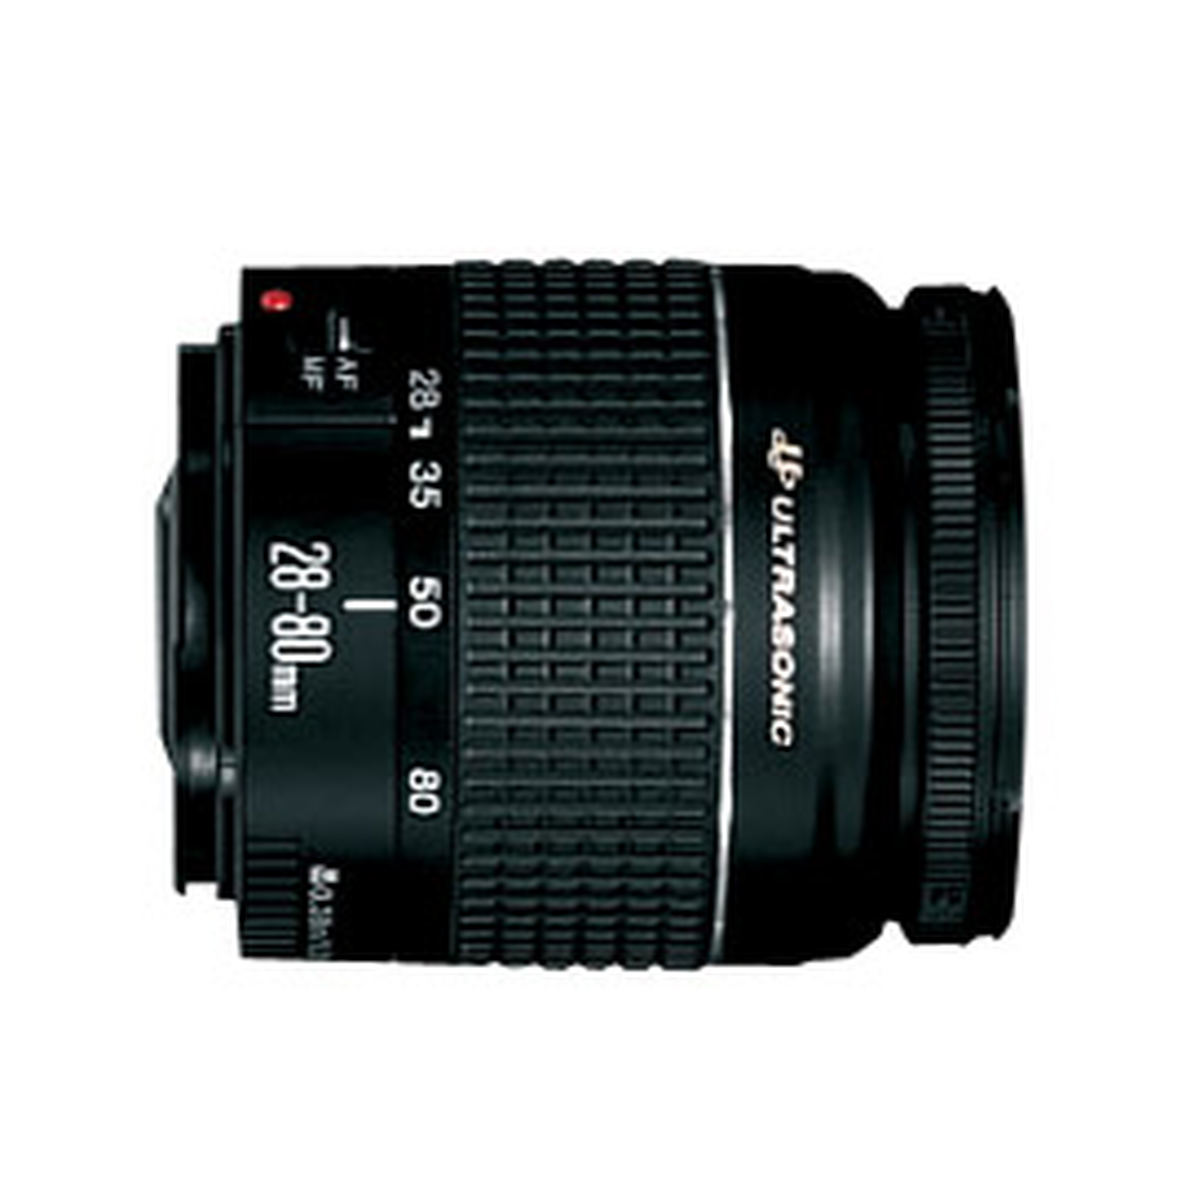 Canon EF 28-80mm f/3.5-5.6 V USM : Specifications and Opinions | JuzaPhoto